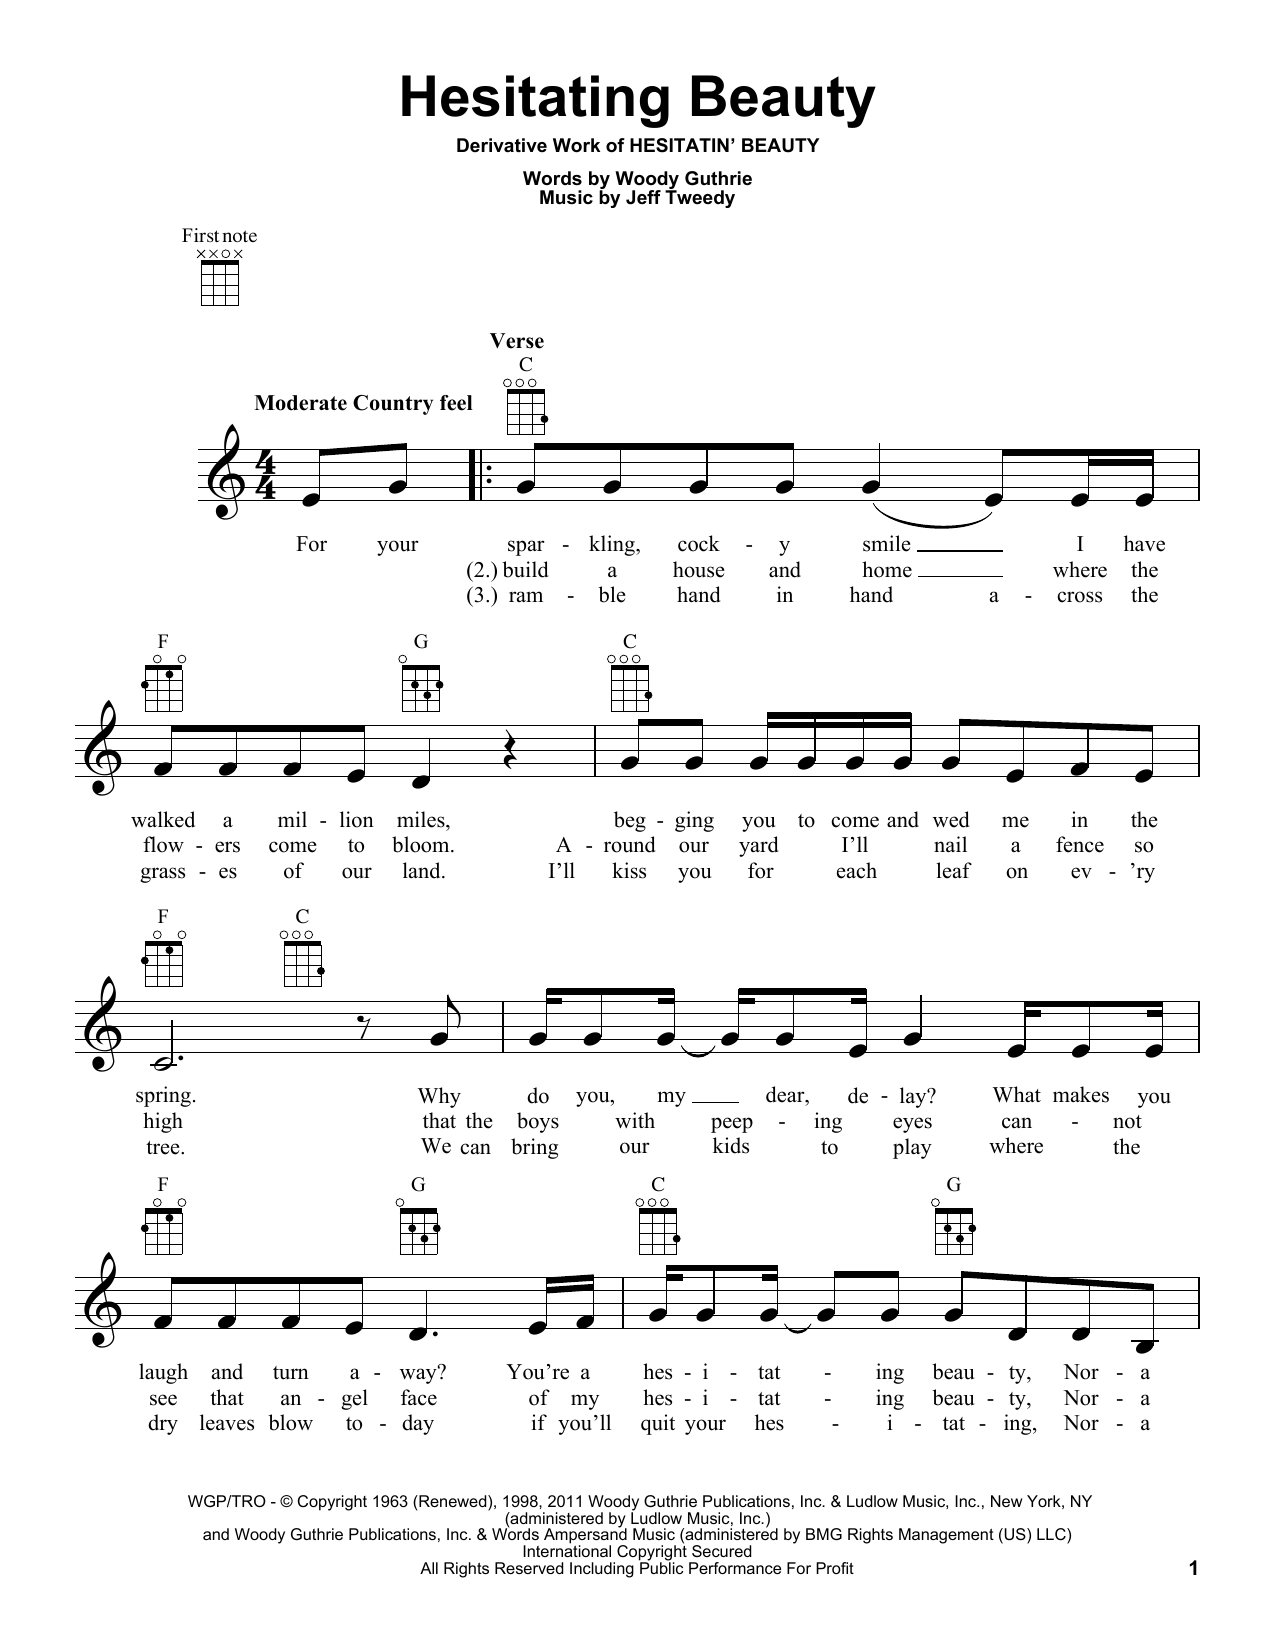 Download Woody Guthrie Hesitating Beauty Sheet Music